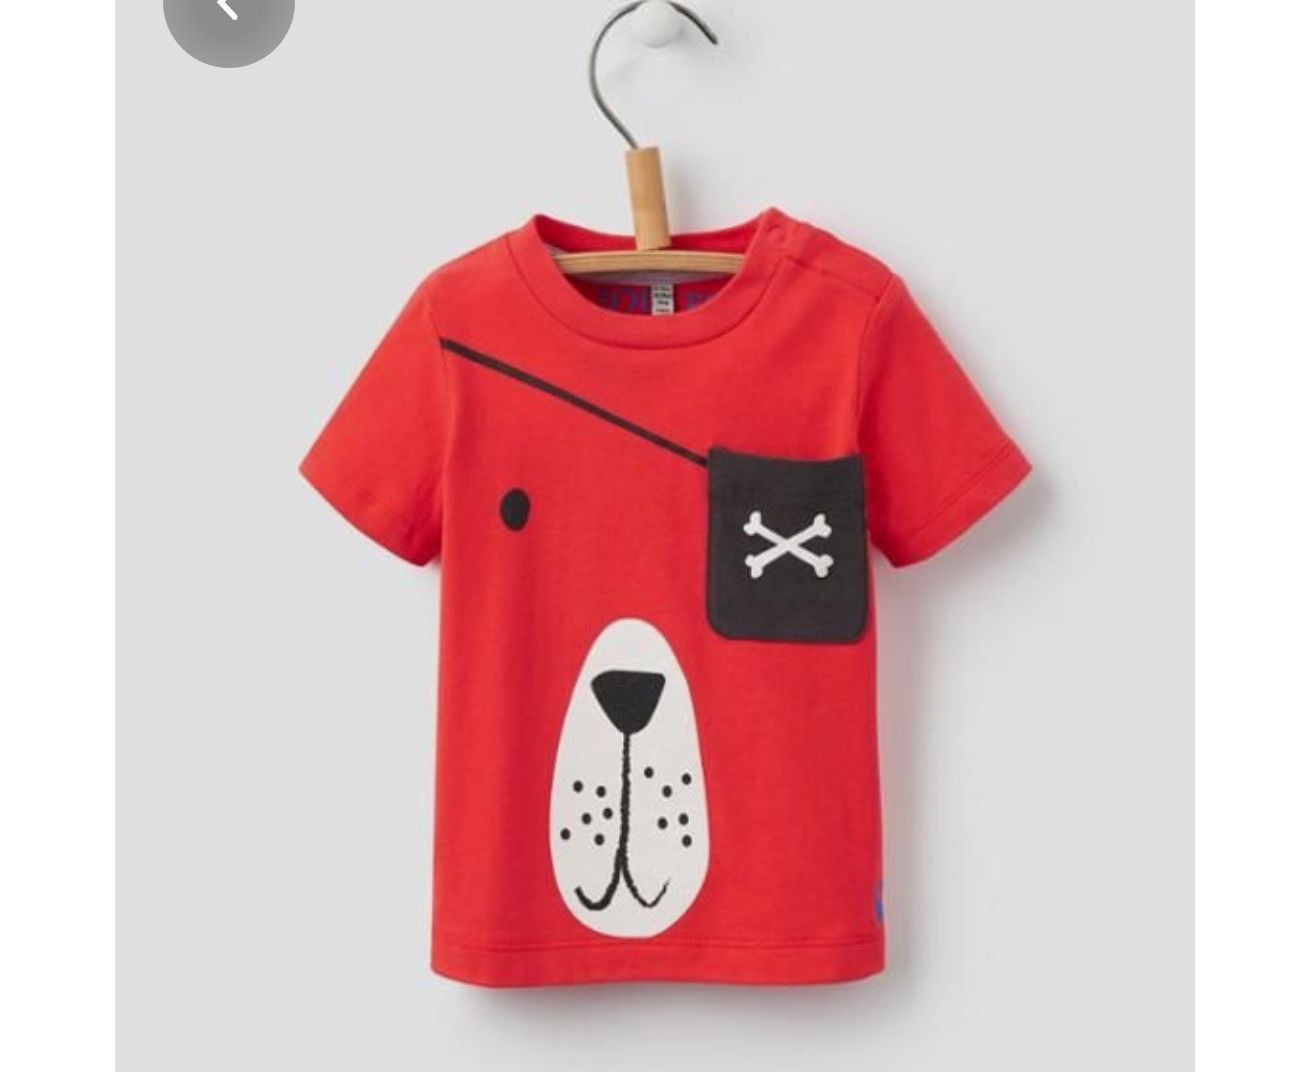 Best Collection of Stylish Printed T-shirts for Kids 2021